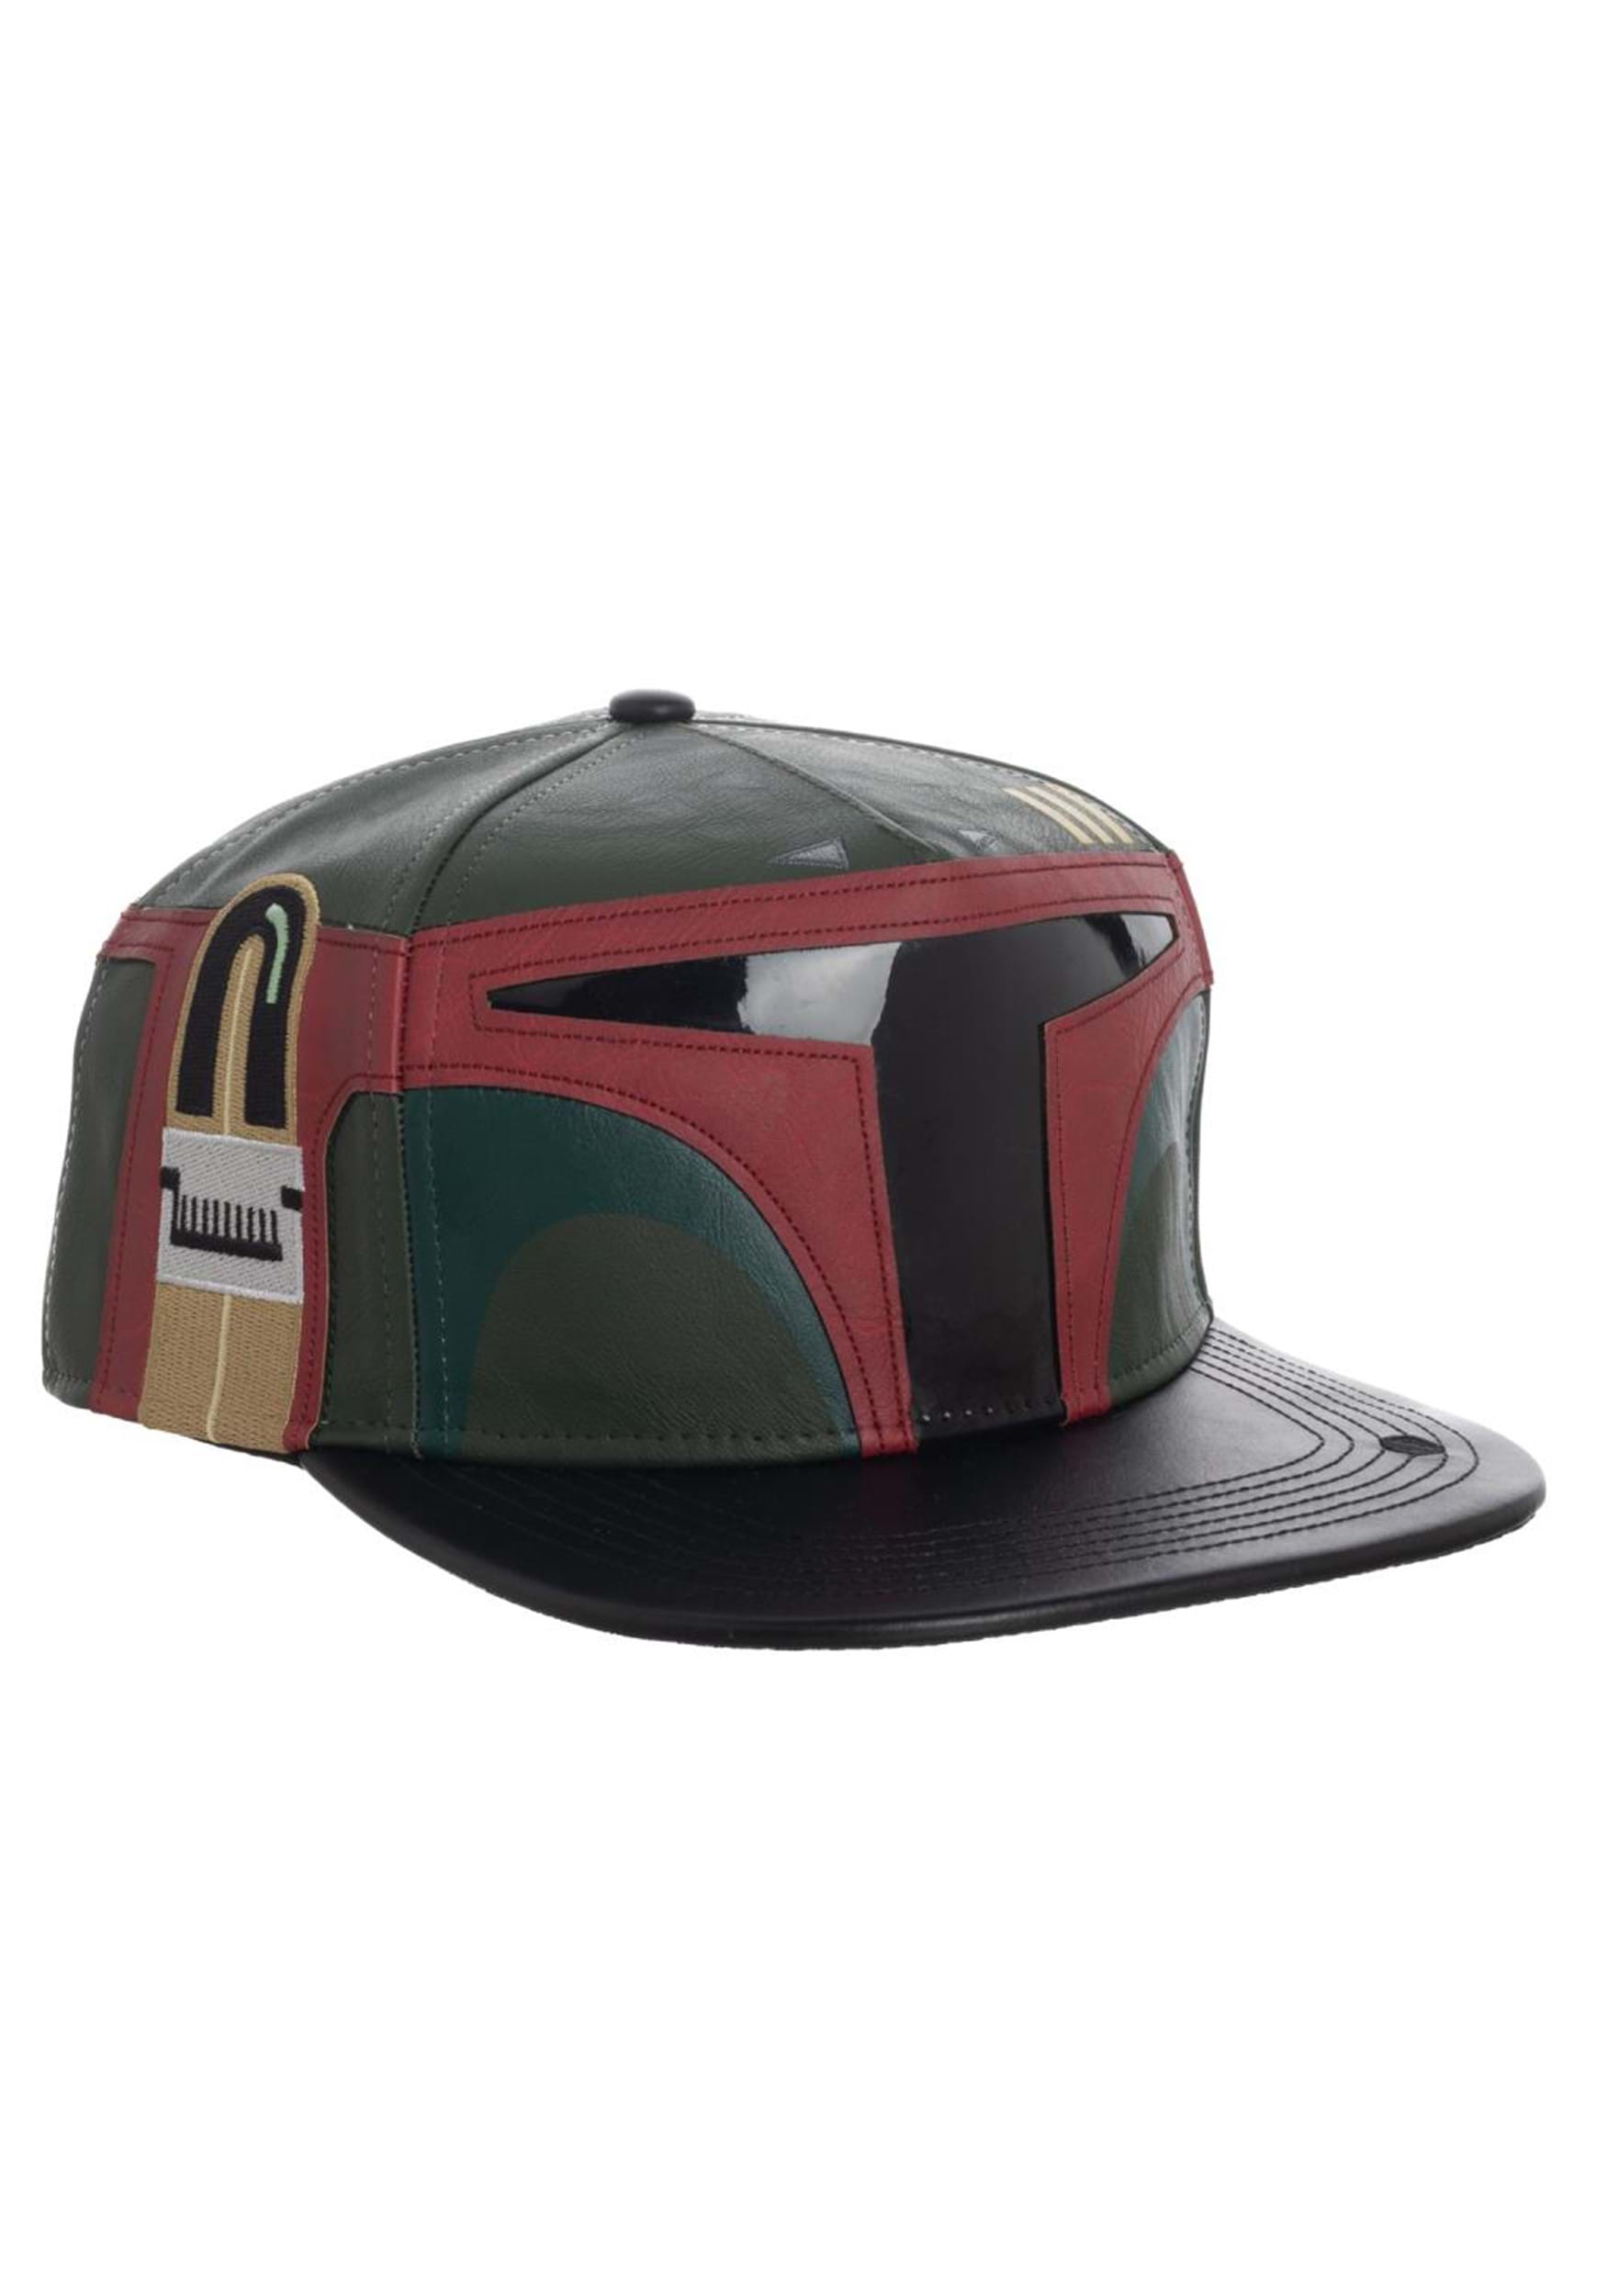 Boba Fett Embroidered Snapback Hat with Sound Chip